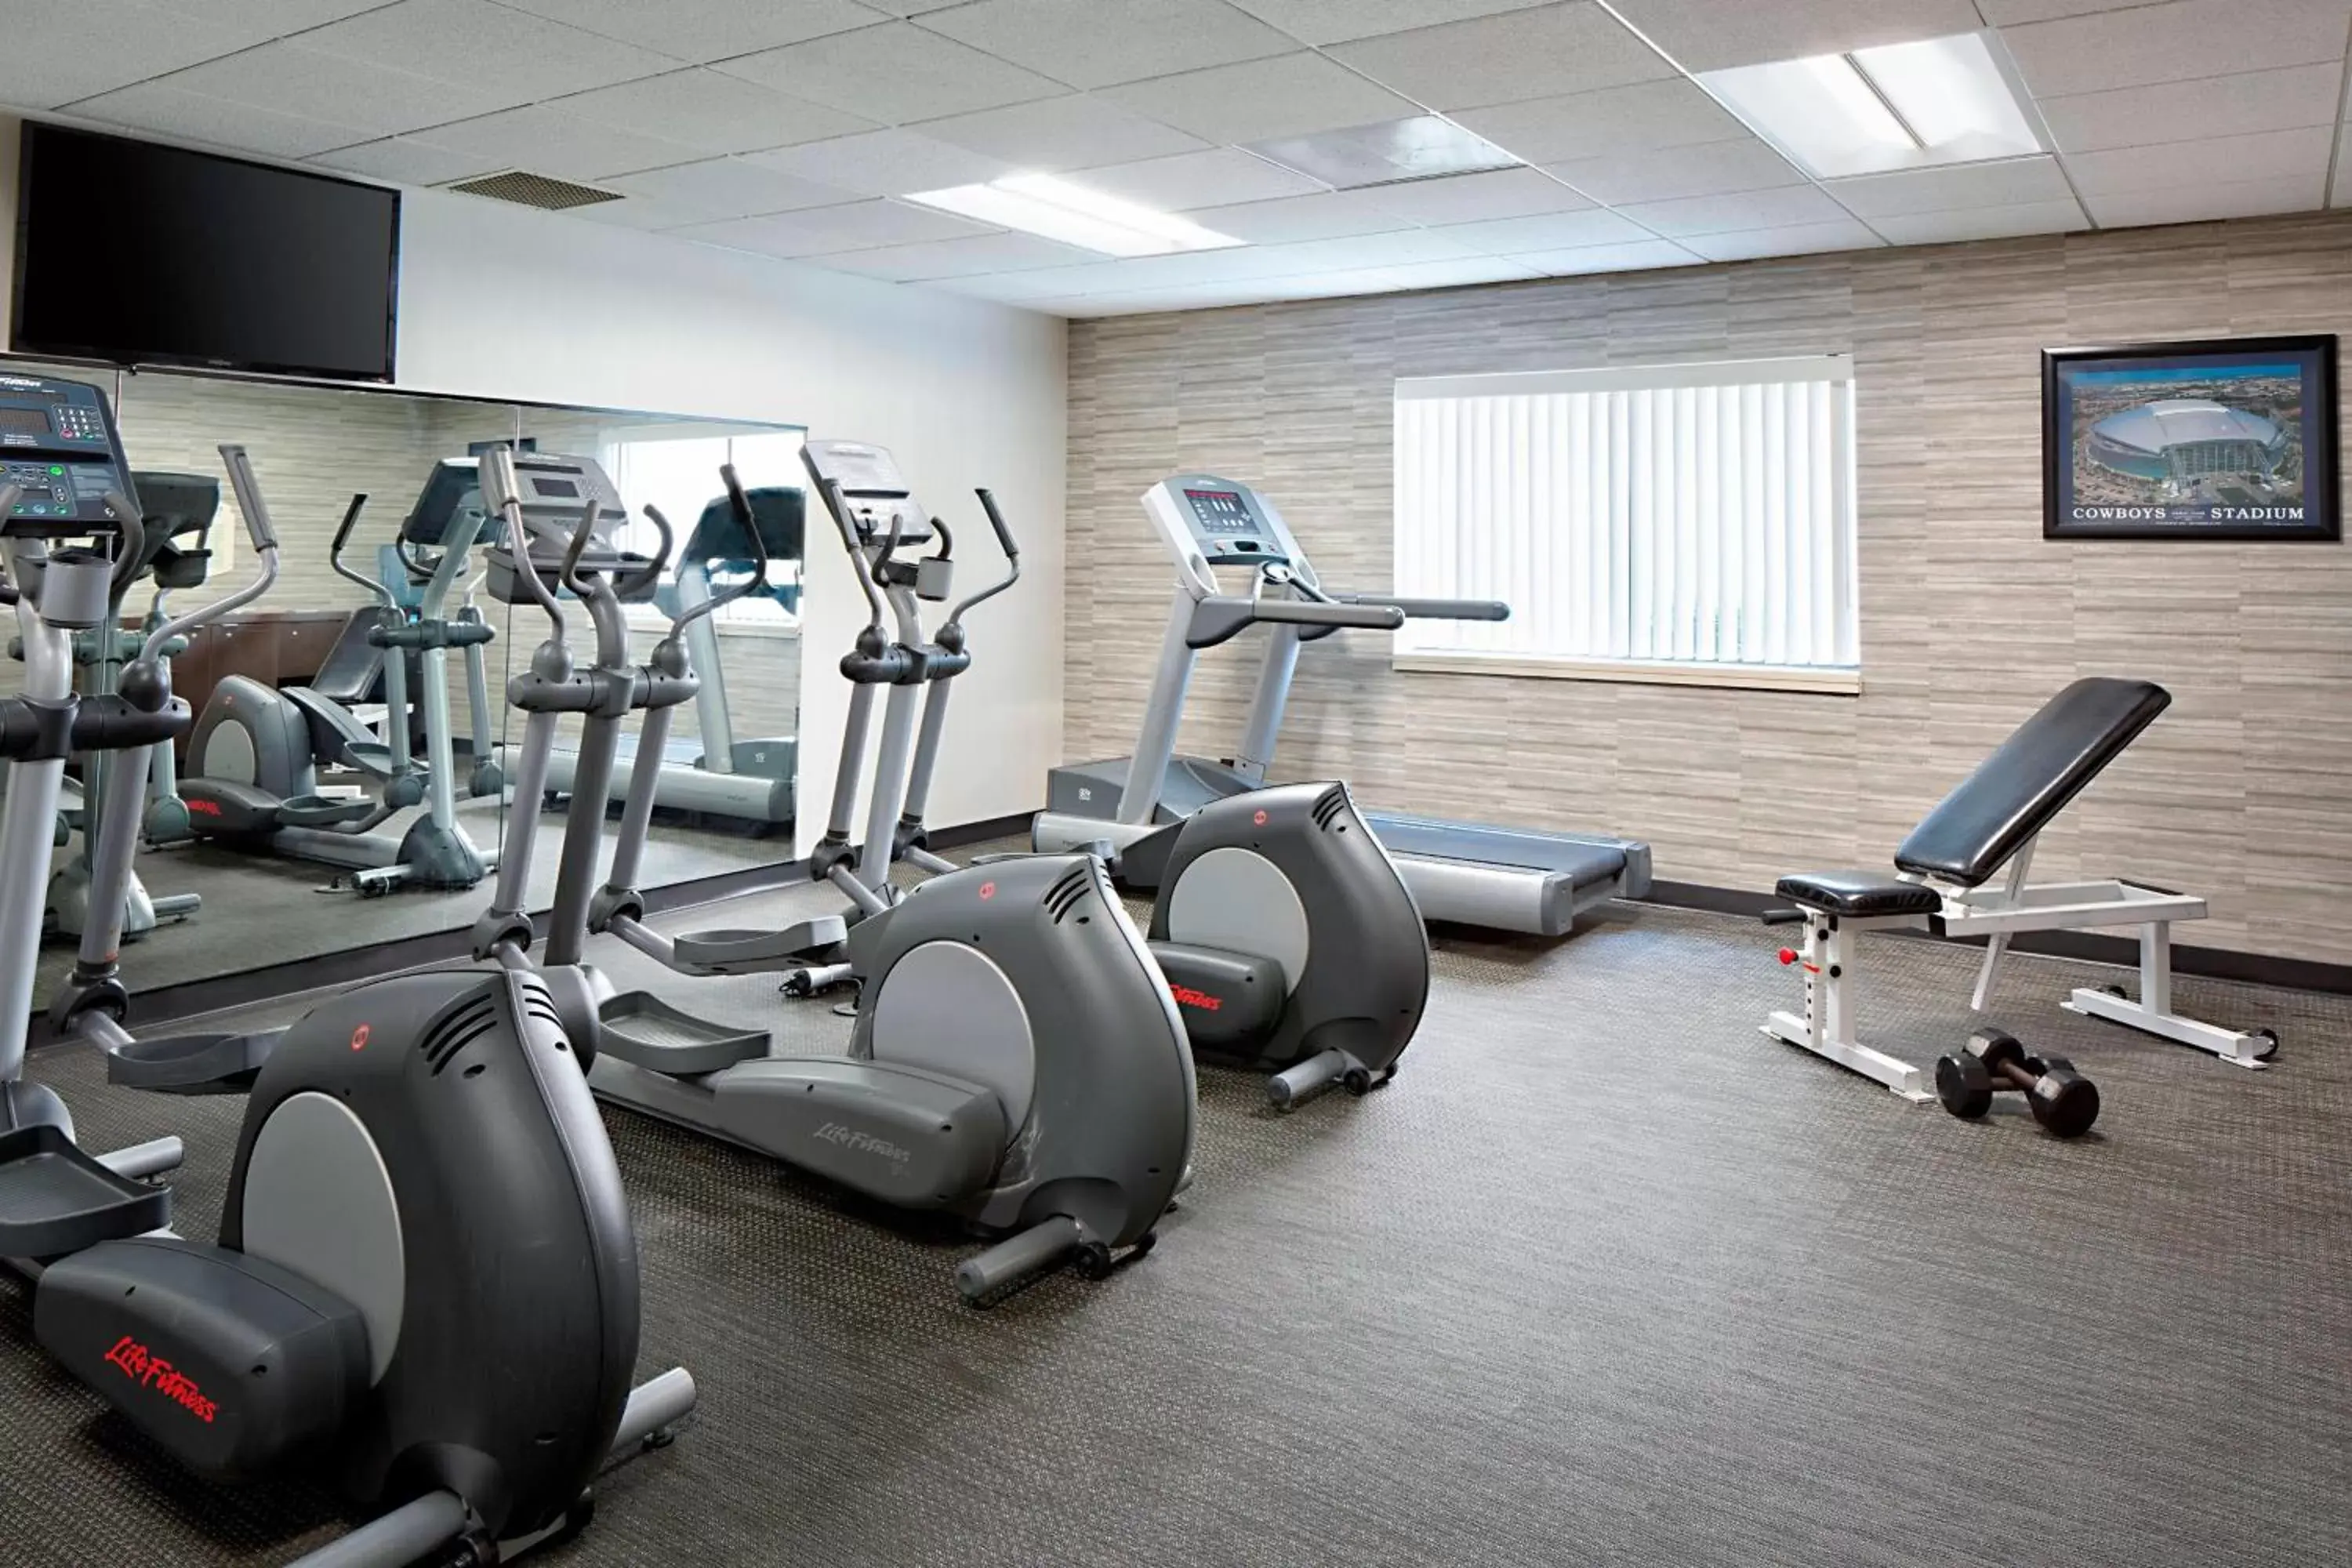 Fitness centre/facilities, Fitness Center/Facilities in Courtyard by Marriott Dallas Arlington Entertainment District